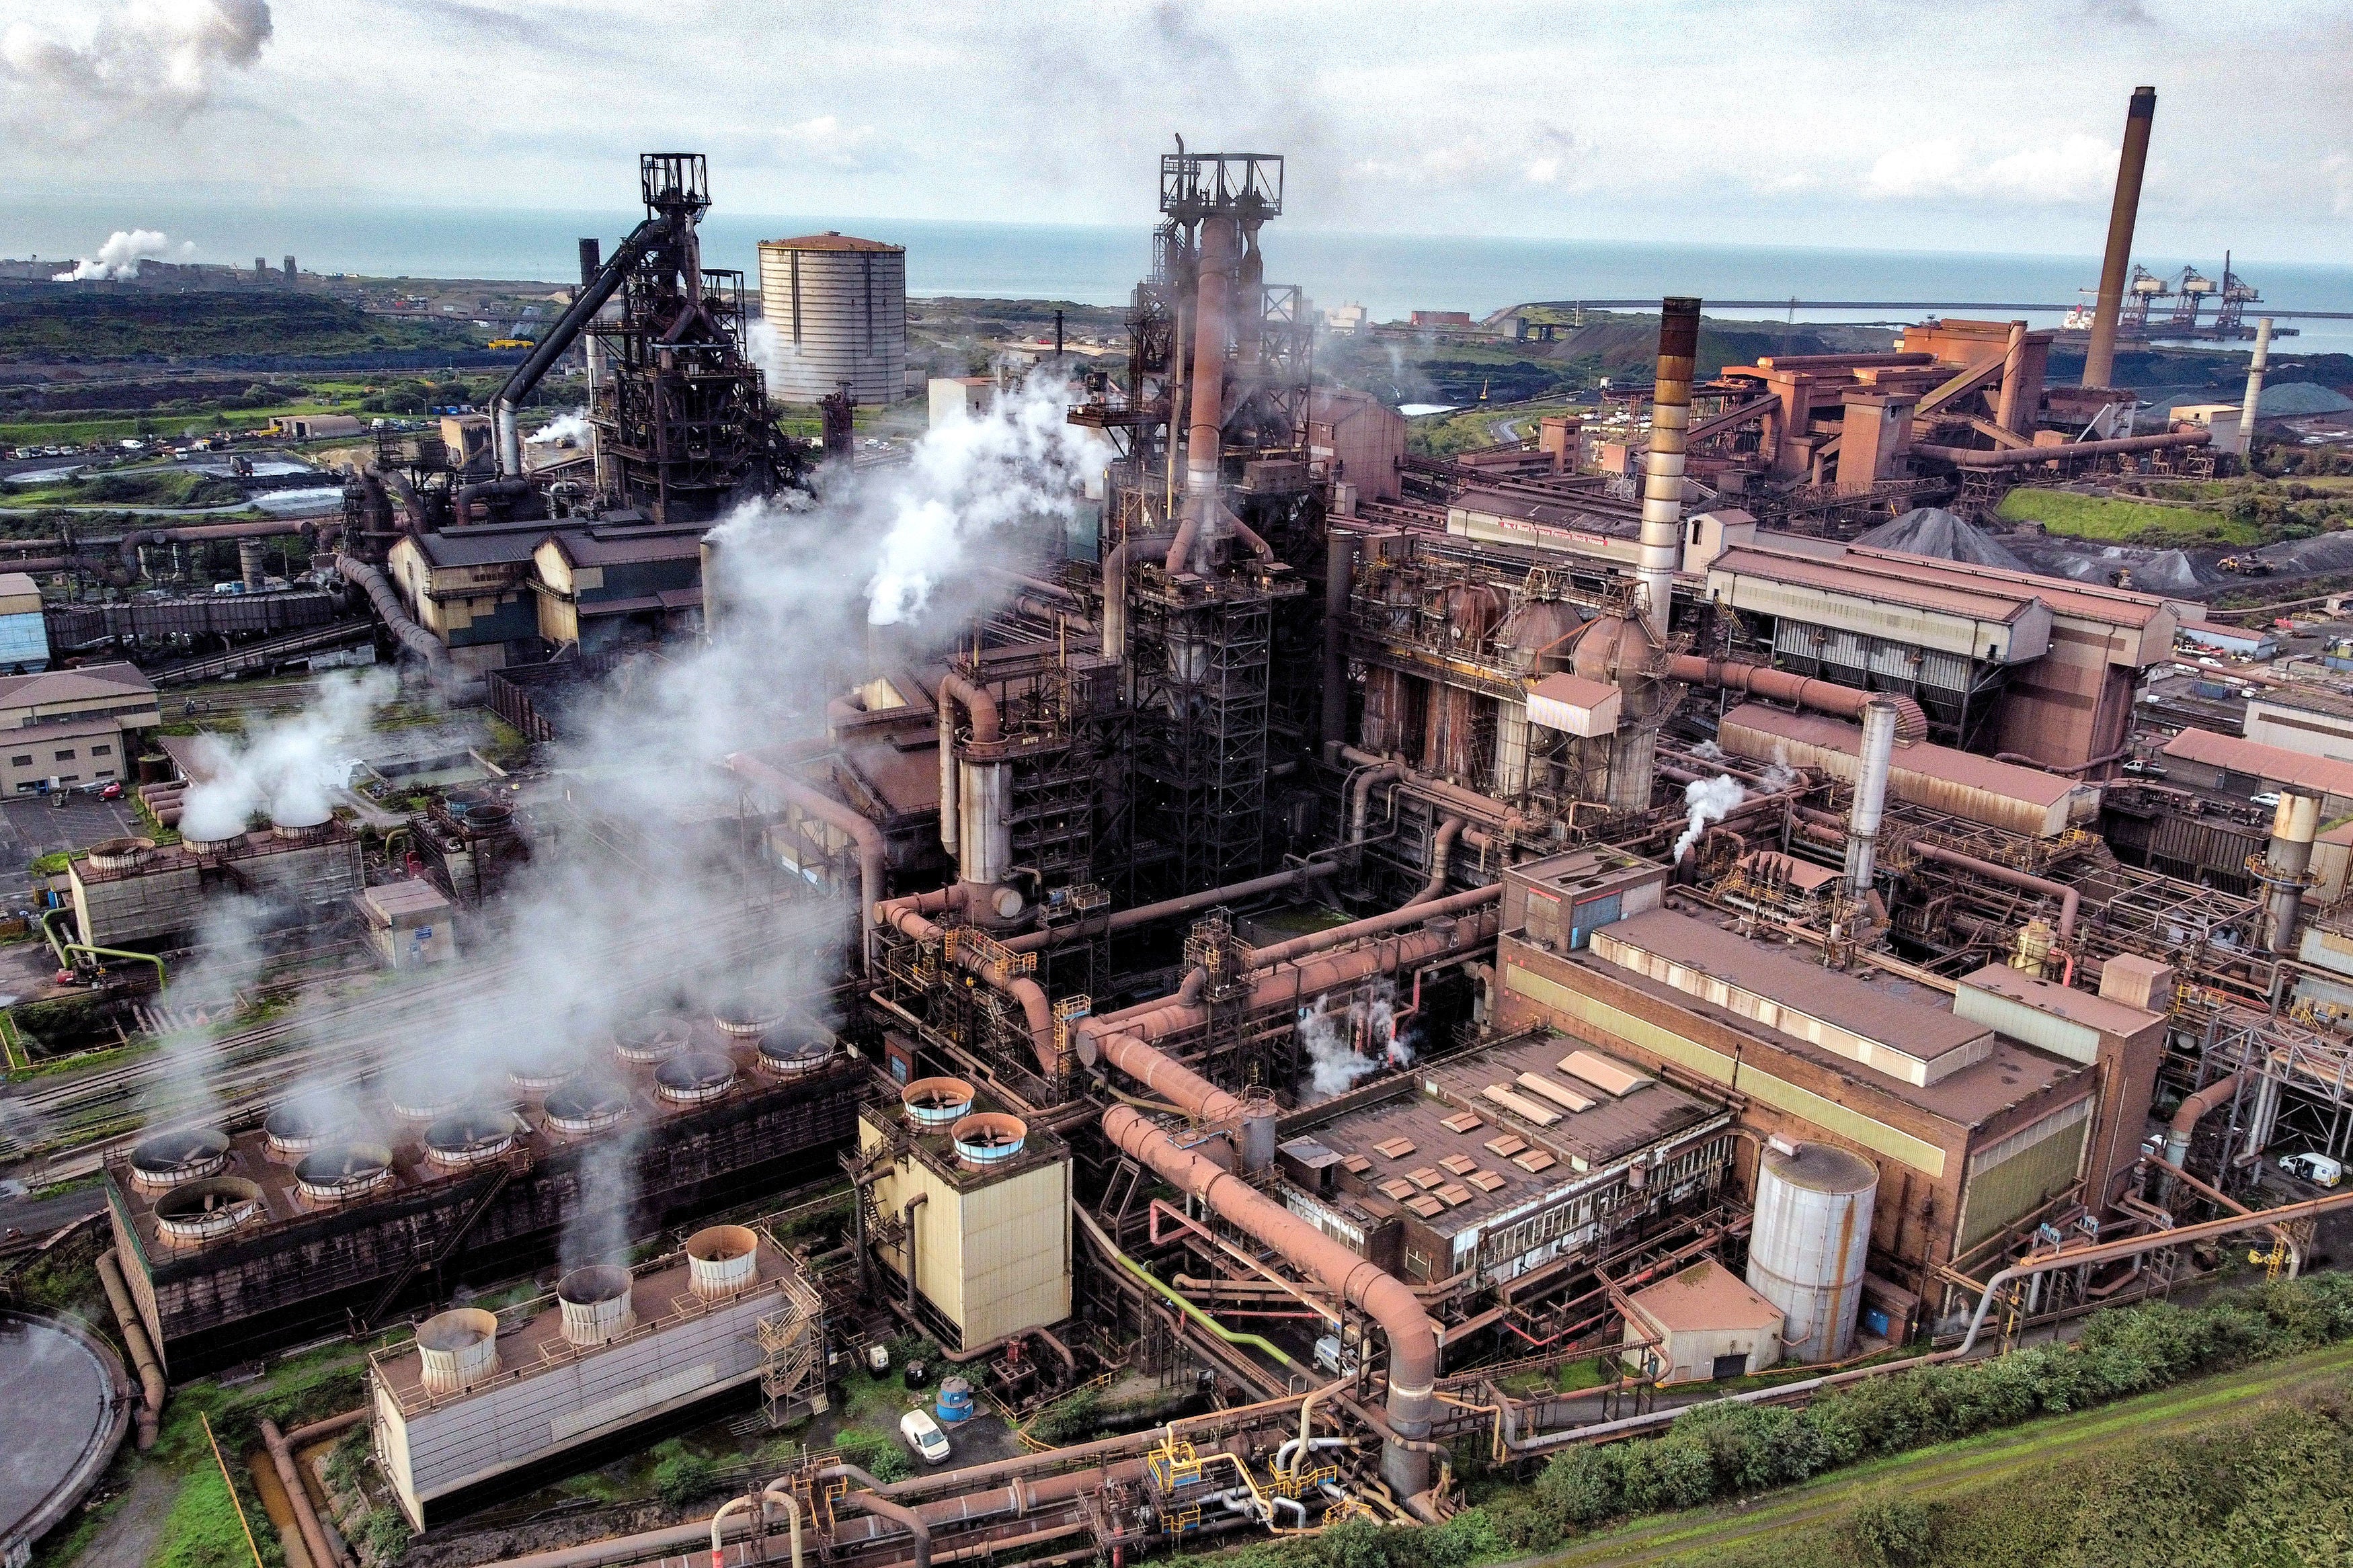 Tata has announced it is closing the two blast furnaces at its Port Talbot plant with the loss of 2,800 jobs